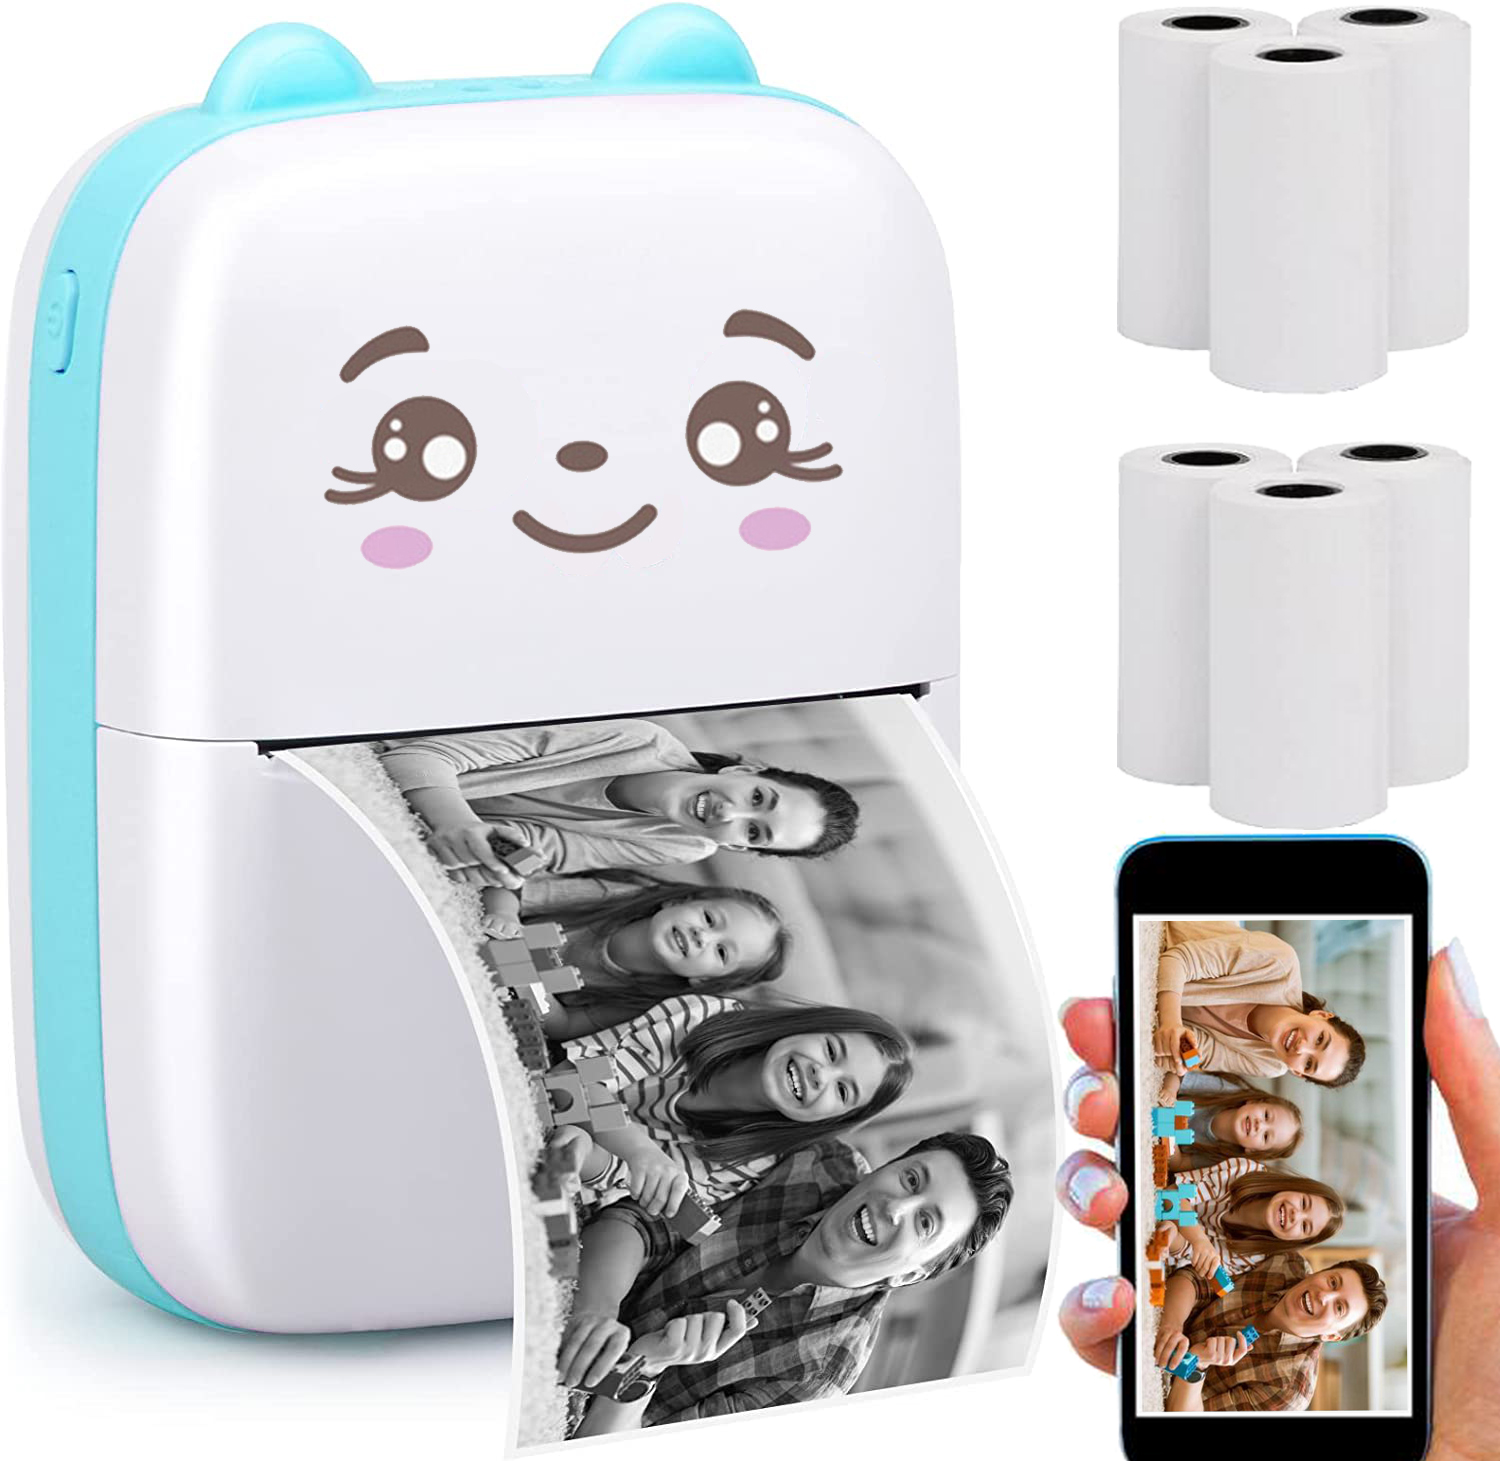 Mini Printer Portable Thermal Printer for Smartphones Wireless Bluetooth Pocket Printers 6 Rolls Paper Inkless Tiny Printer for kids students